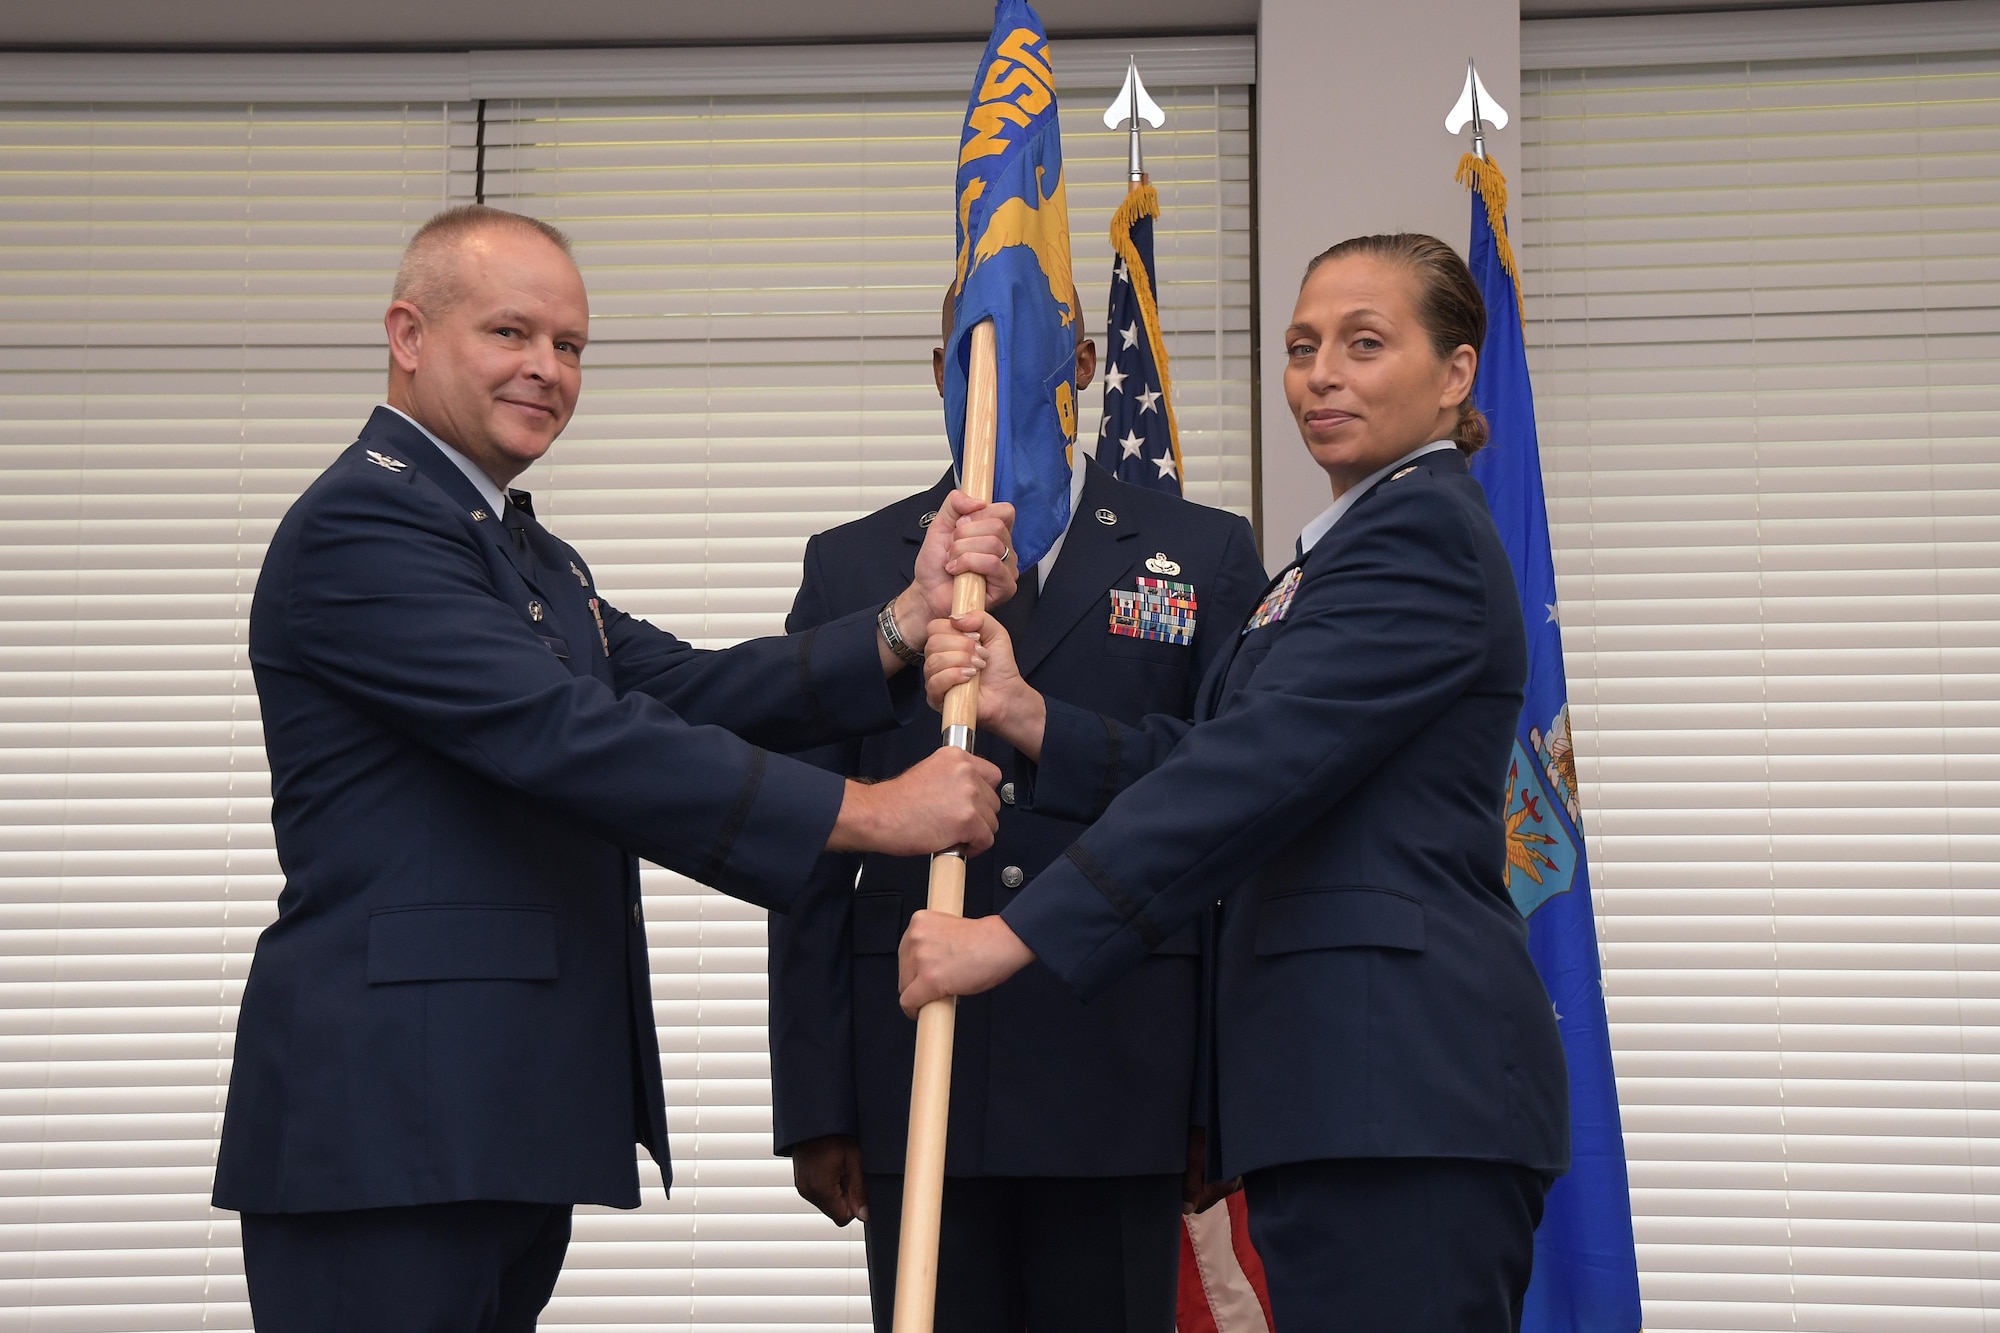 Lt. Col. Suzanne Etedali accepts the guidon from Col. Joseph Revit, 94th Mission Support Group commander during an assumption of command ceremony Aug. 4, 2019.